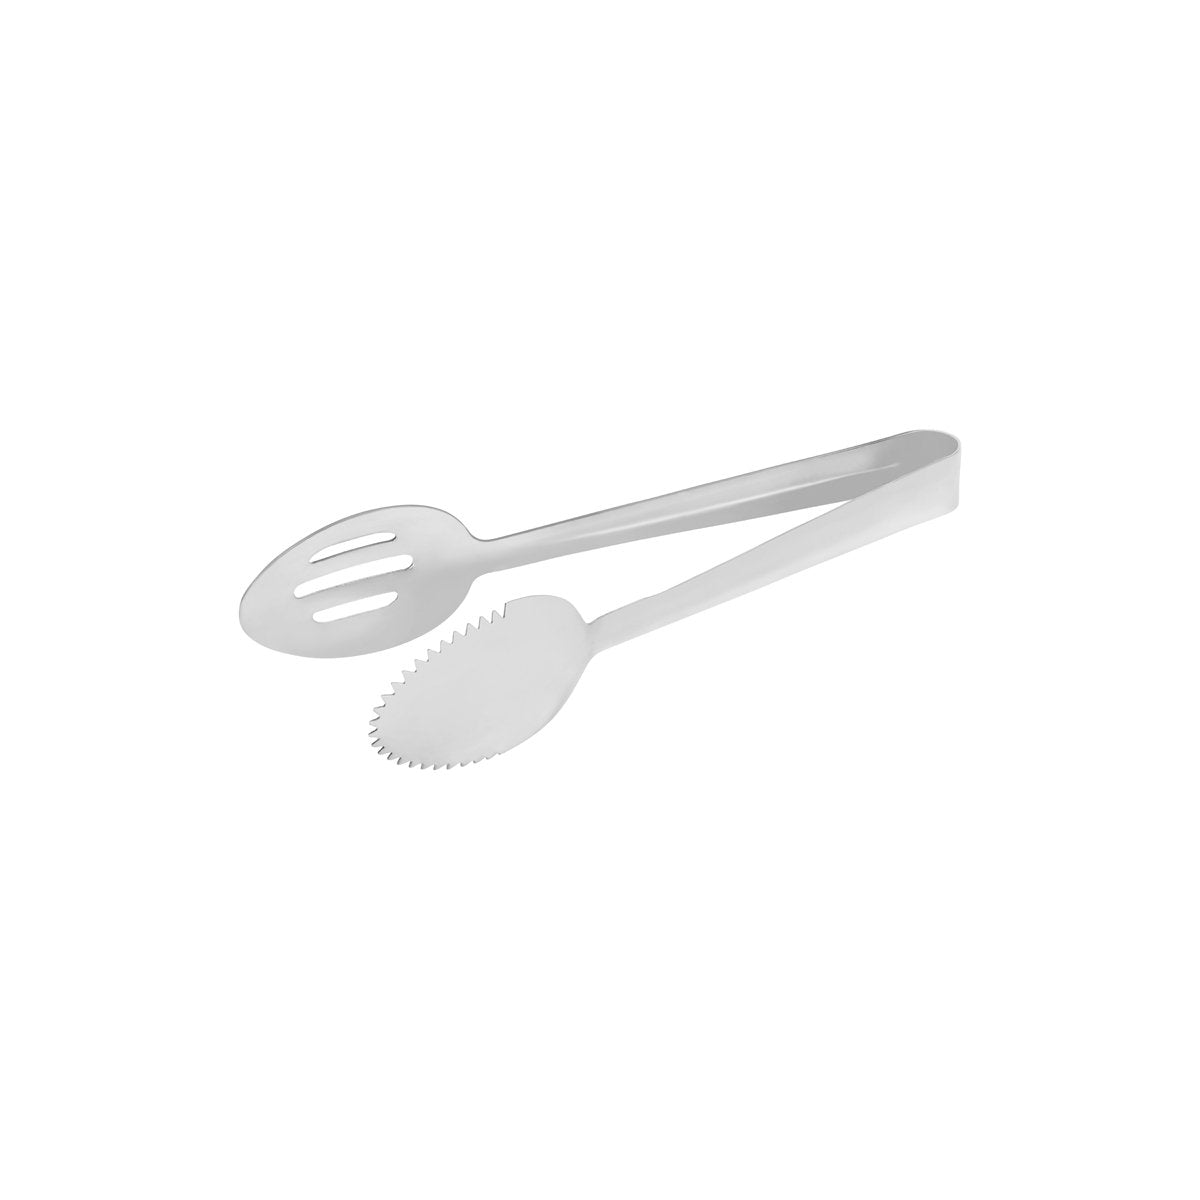 70274 Chef Inox Tong Round Spoon One Side Slotted 245mm Tomkin Australia Hospitality Supplies